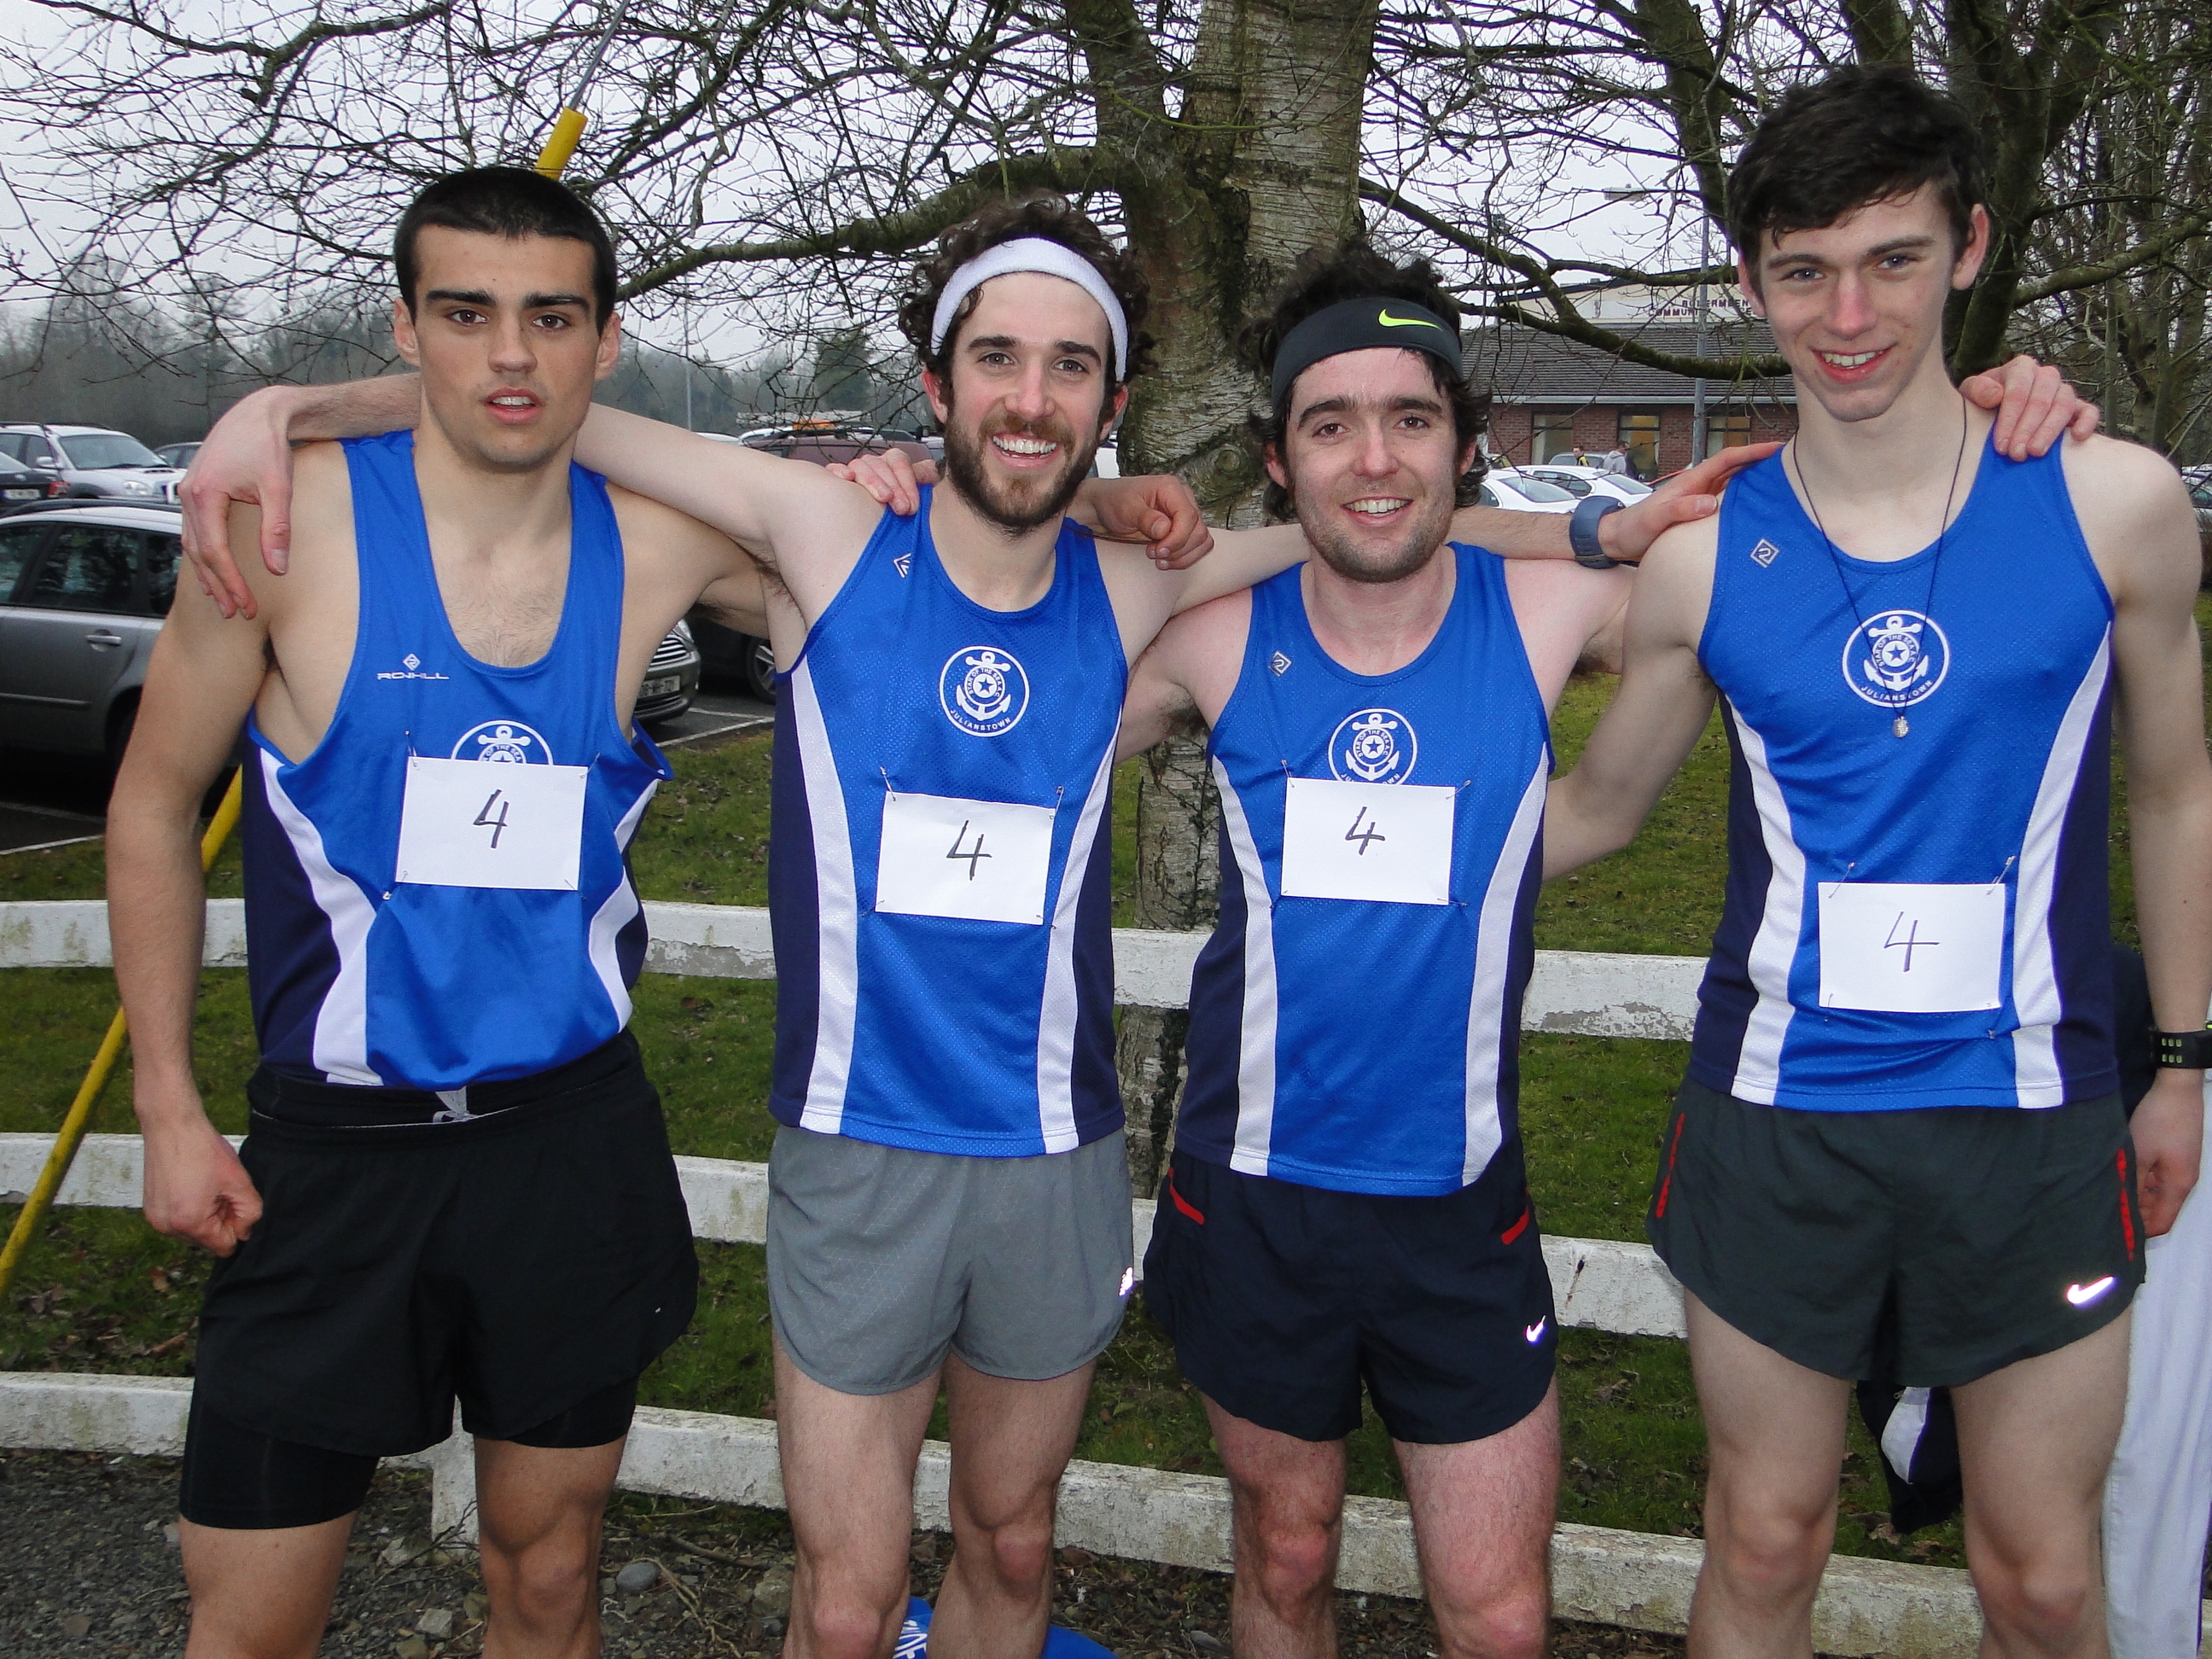 andrew-colin-eoin-rob-after-winning-meath-road-relay-championships